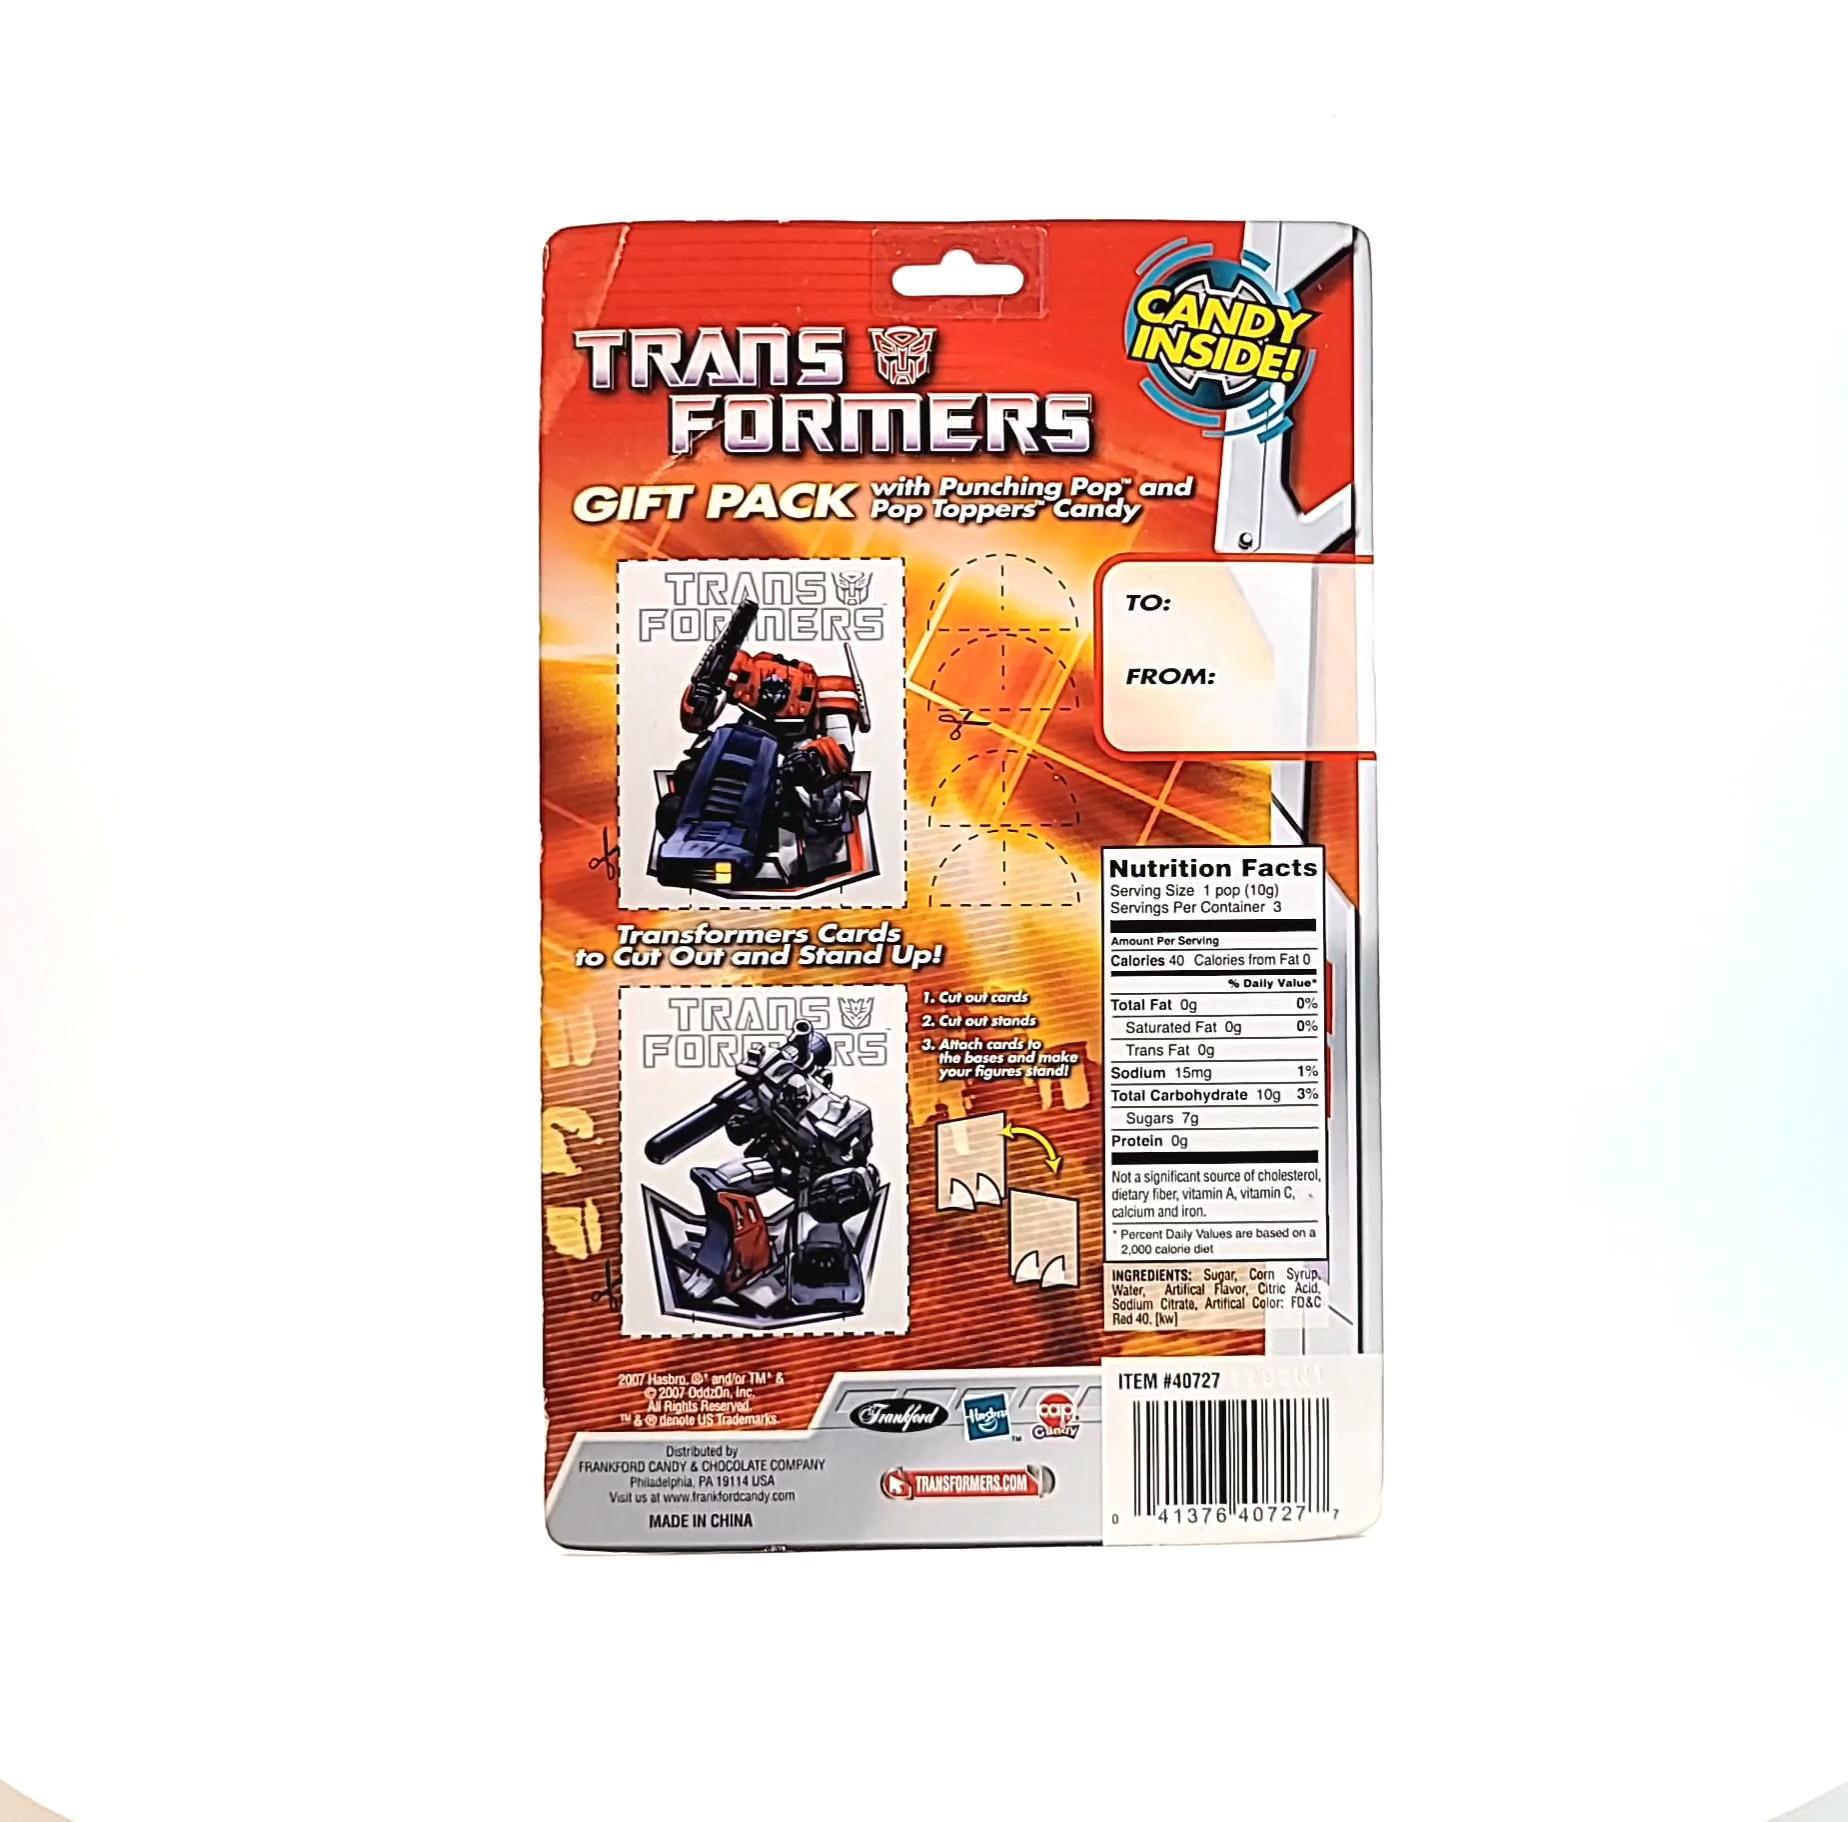 Transformers Optimus Prime Punching Pop & Pop Topper Candy Gift Set